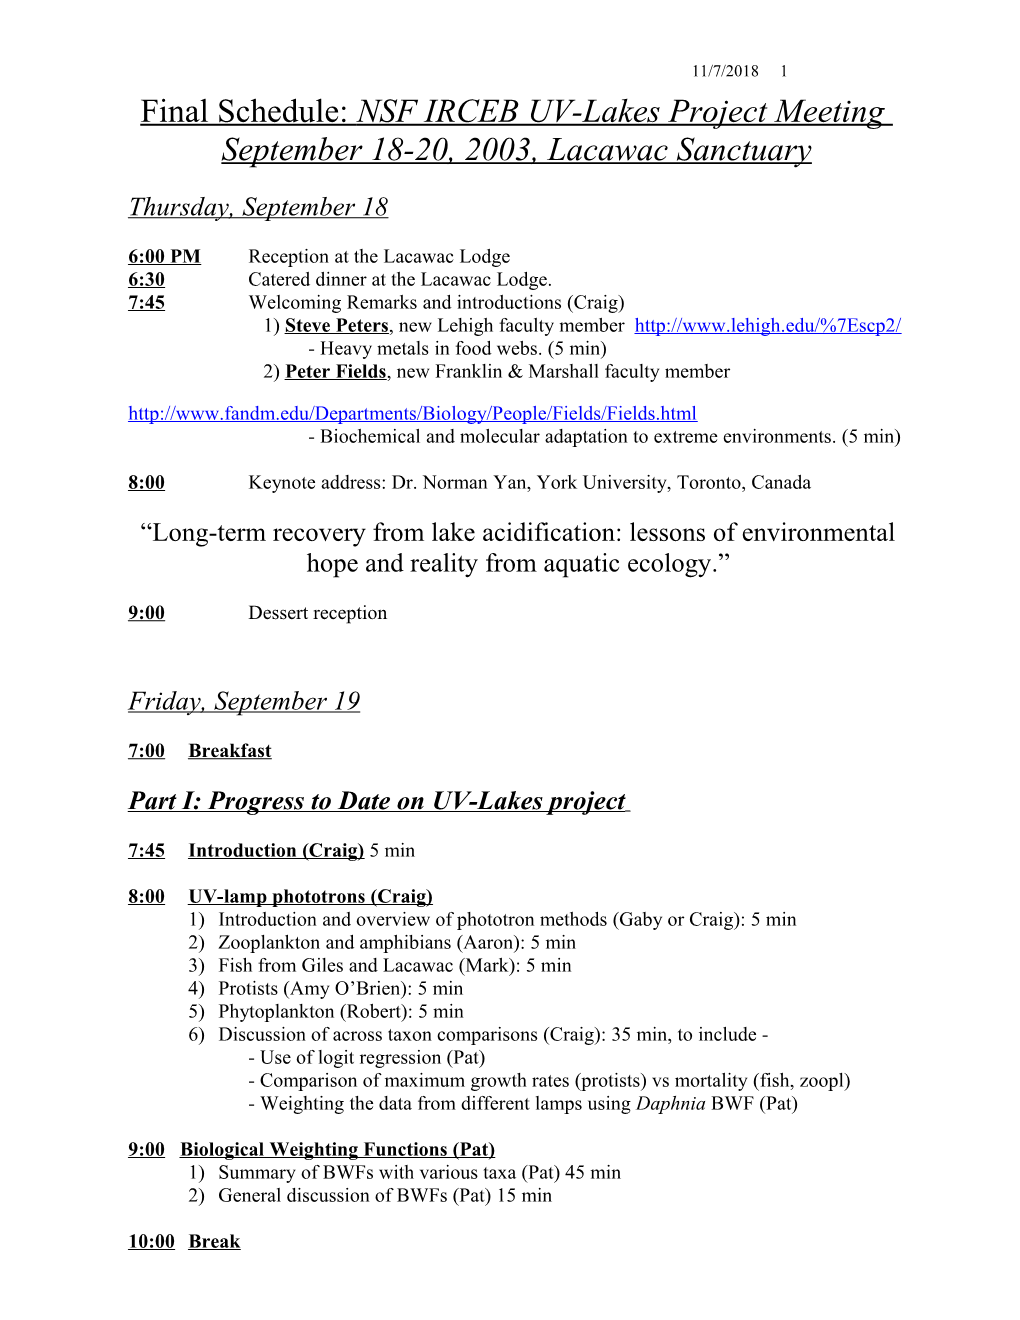 Final Schedule: NSF IRCEB UV-Lakes Project Meeting